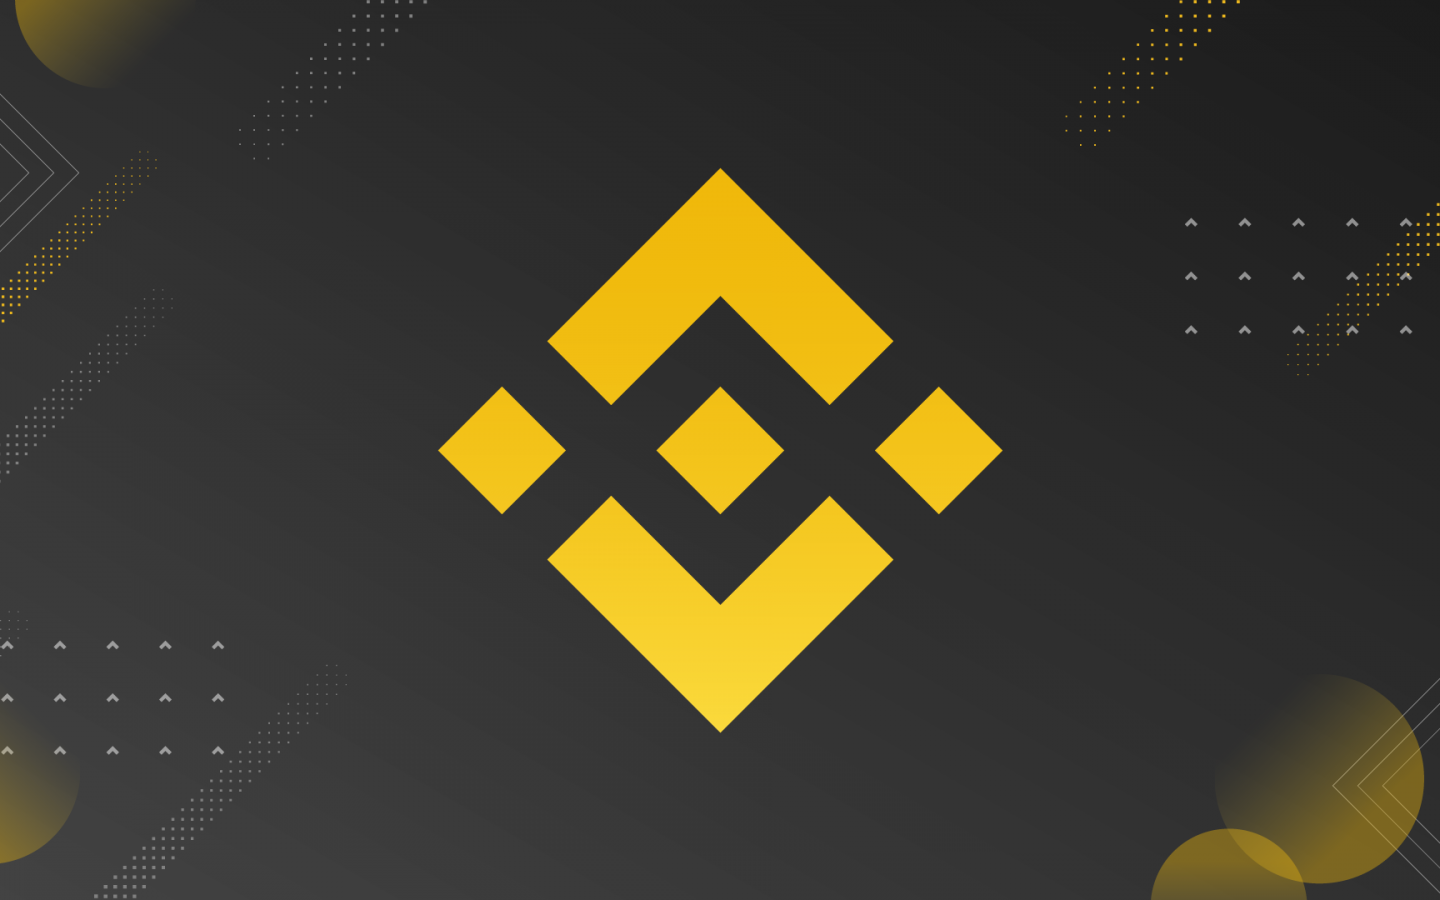 Get Your Official Binance Wallpaper And Image Here